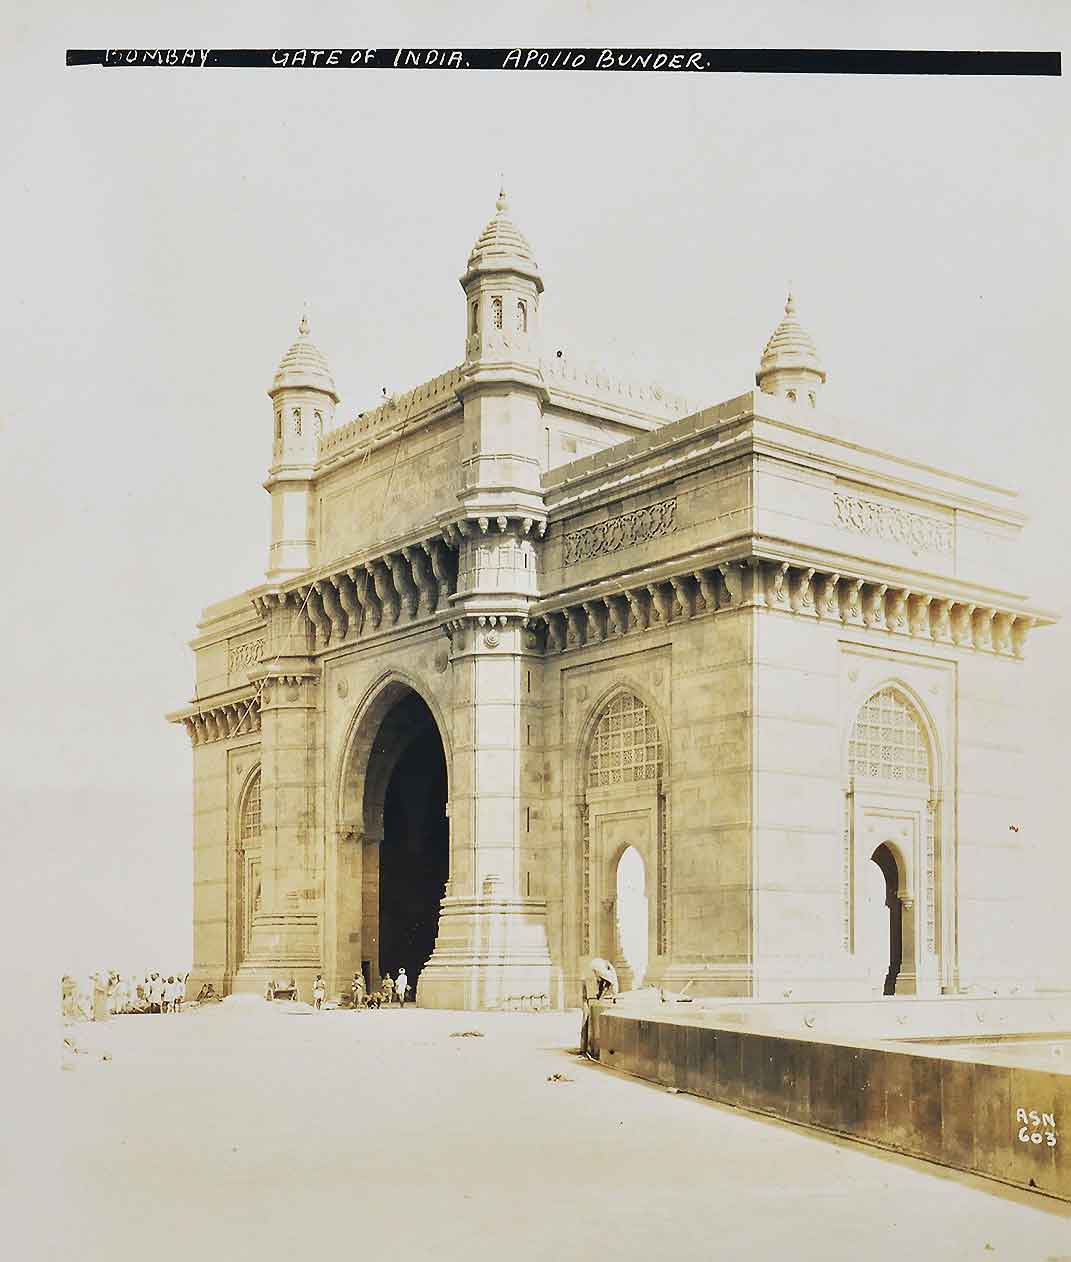 Newly Completed Gateway Of India Bombay, 1924 Photo